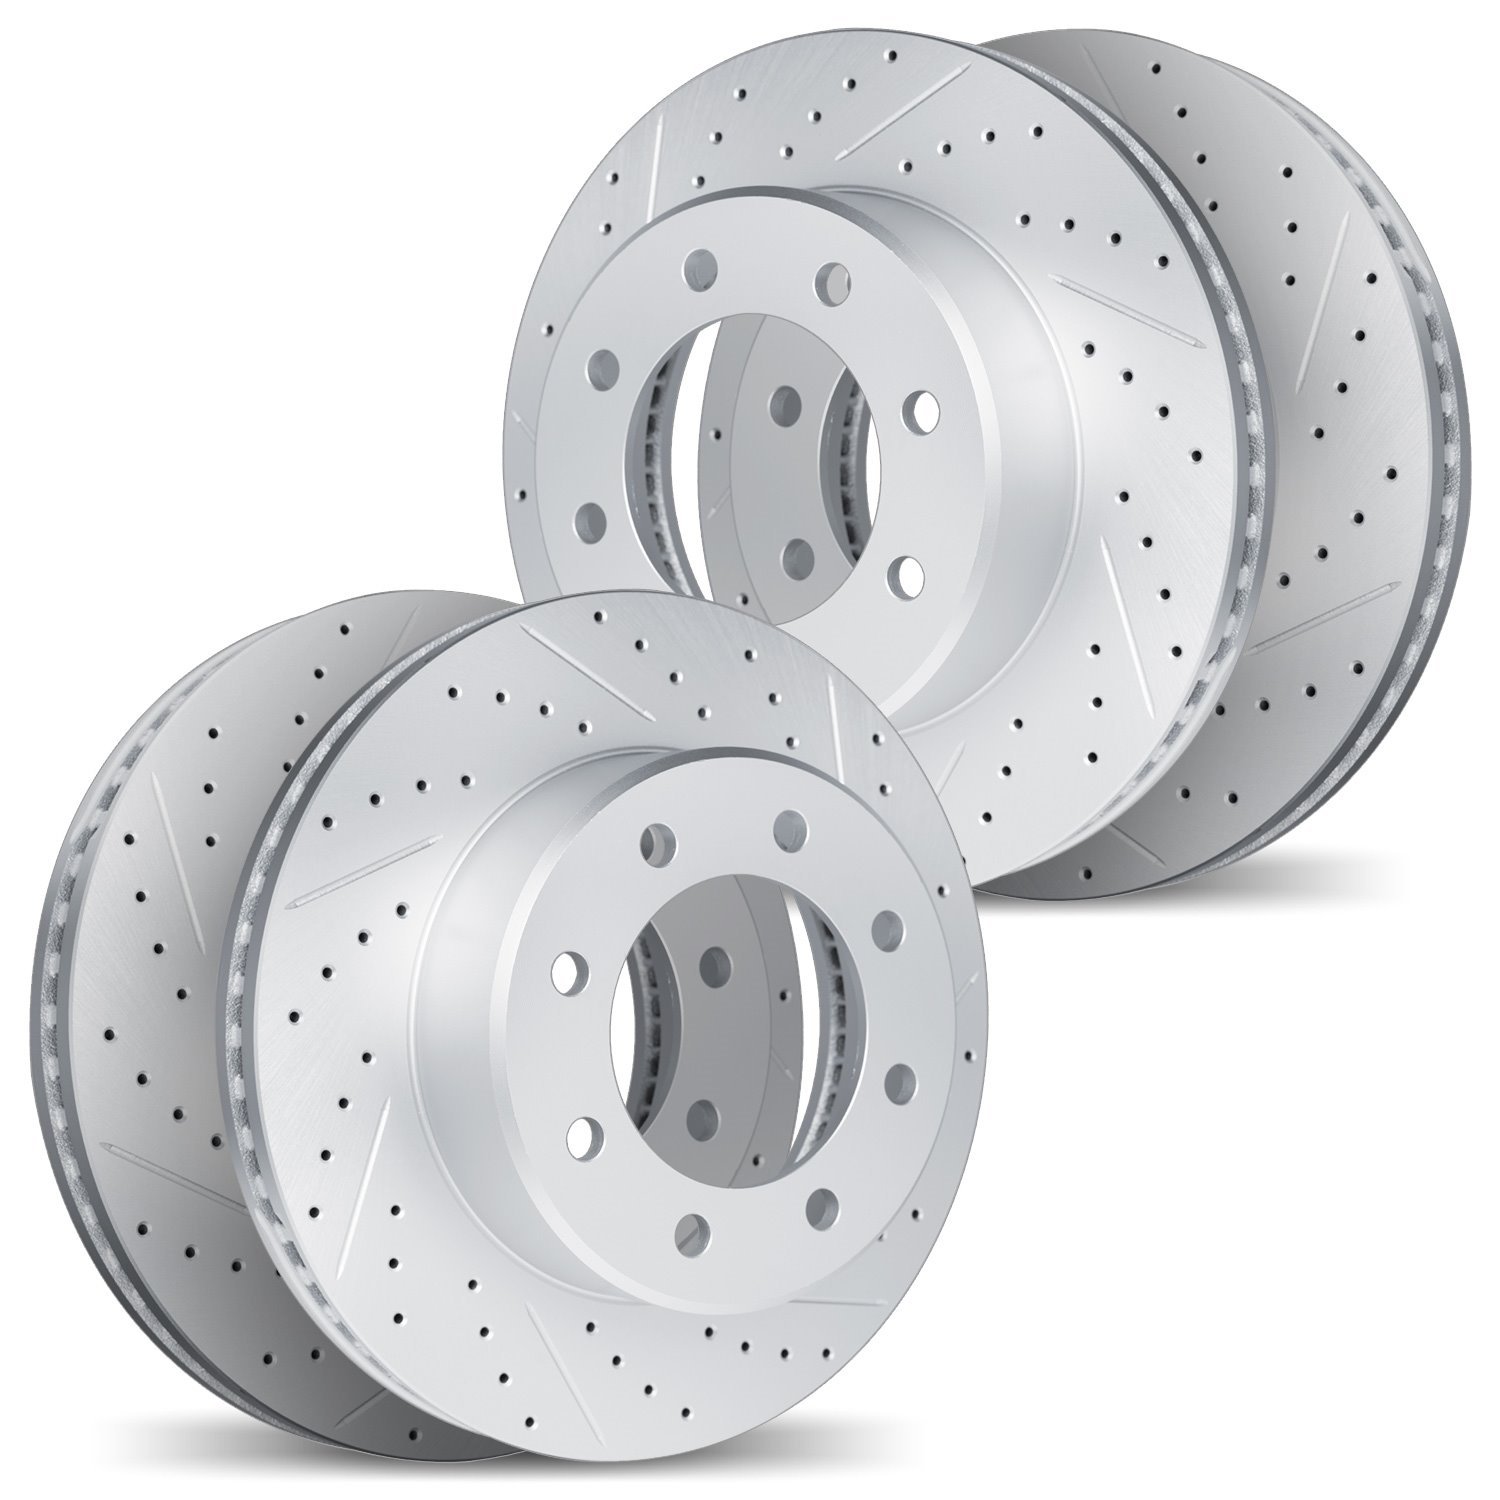 2004-54123 Geoperformance Drilled/Slotted Brake Rotors, 2005-2012 Ford/Lincoln/Mercury/Mazda, Position: Front and Rear